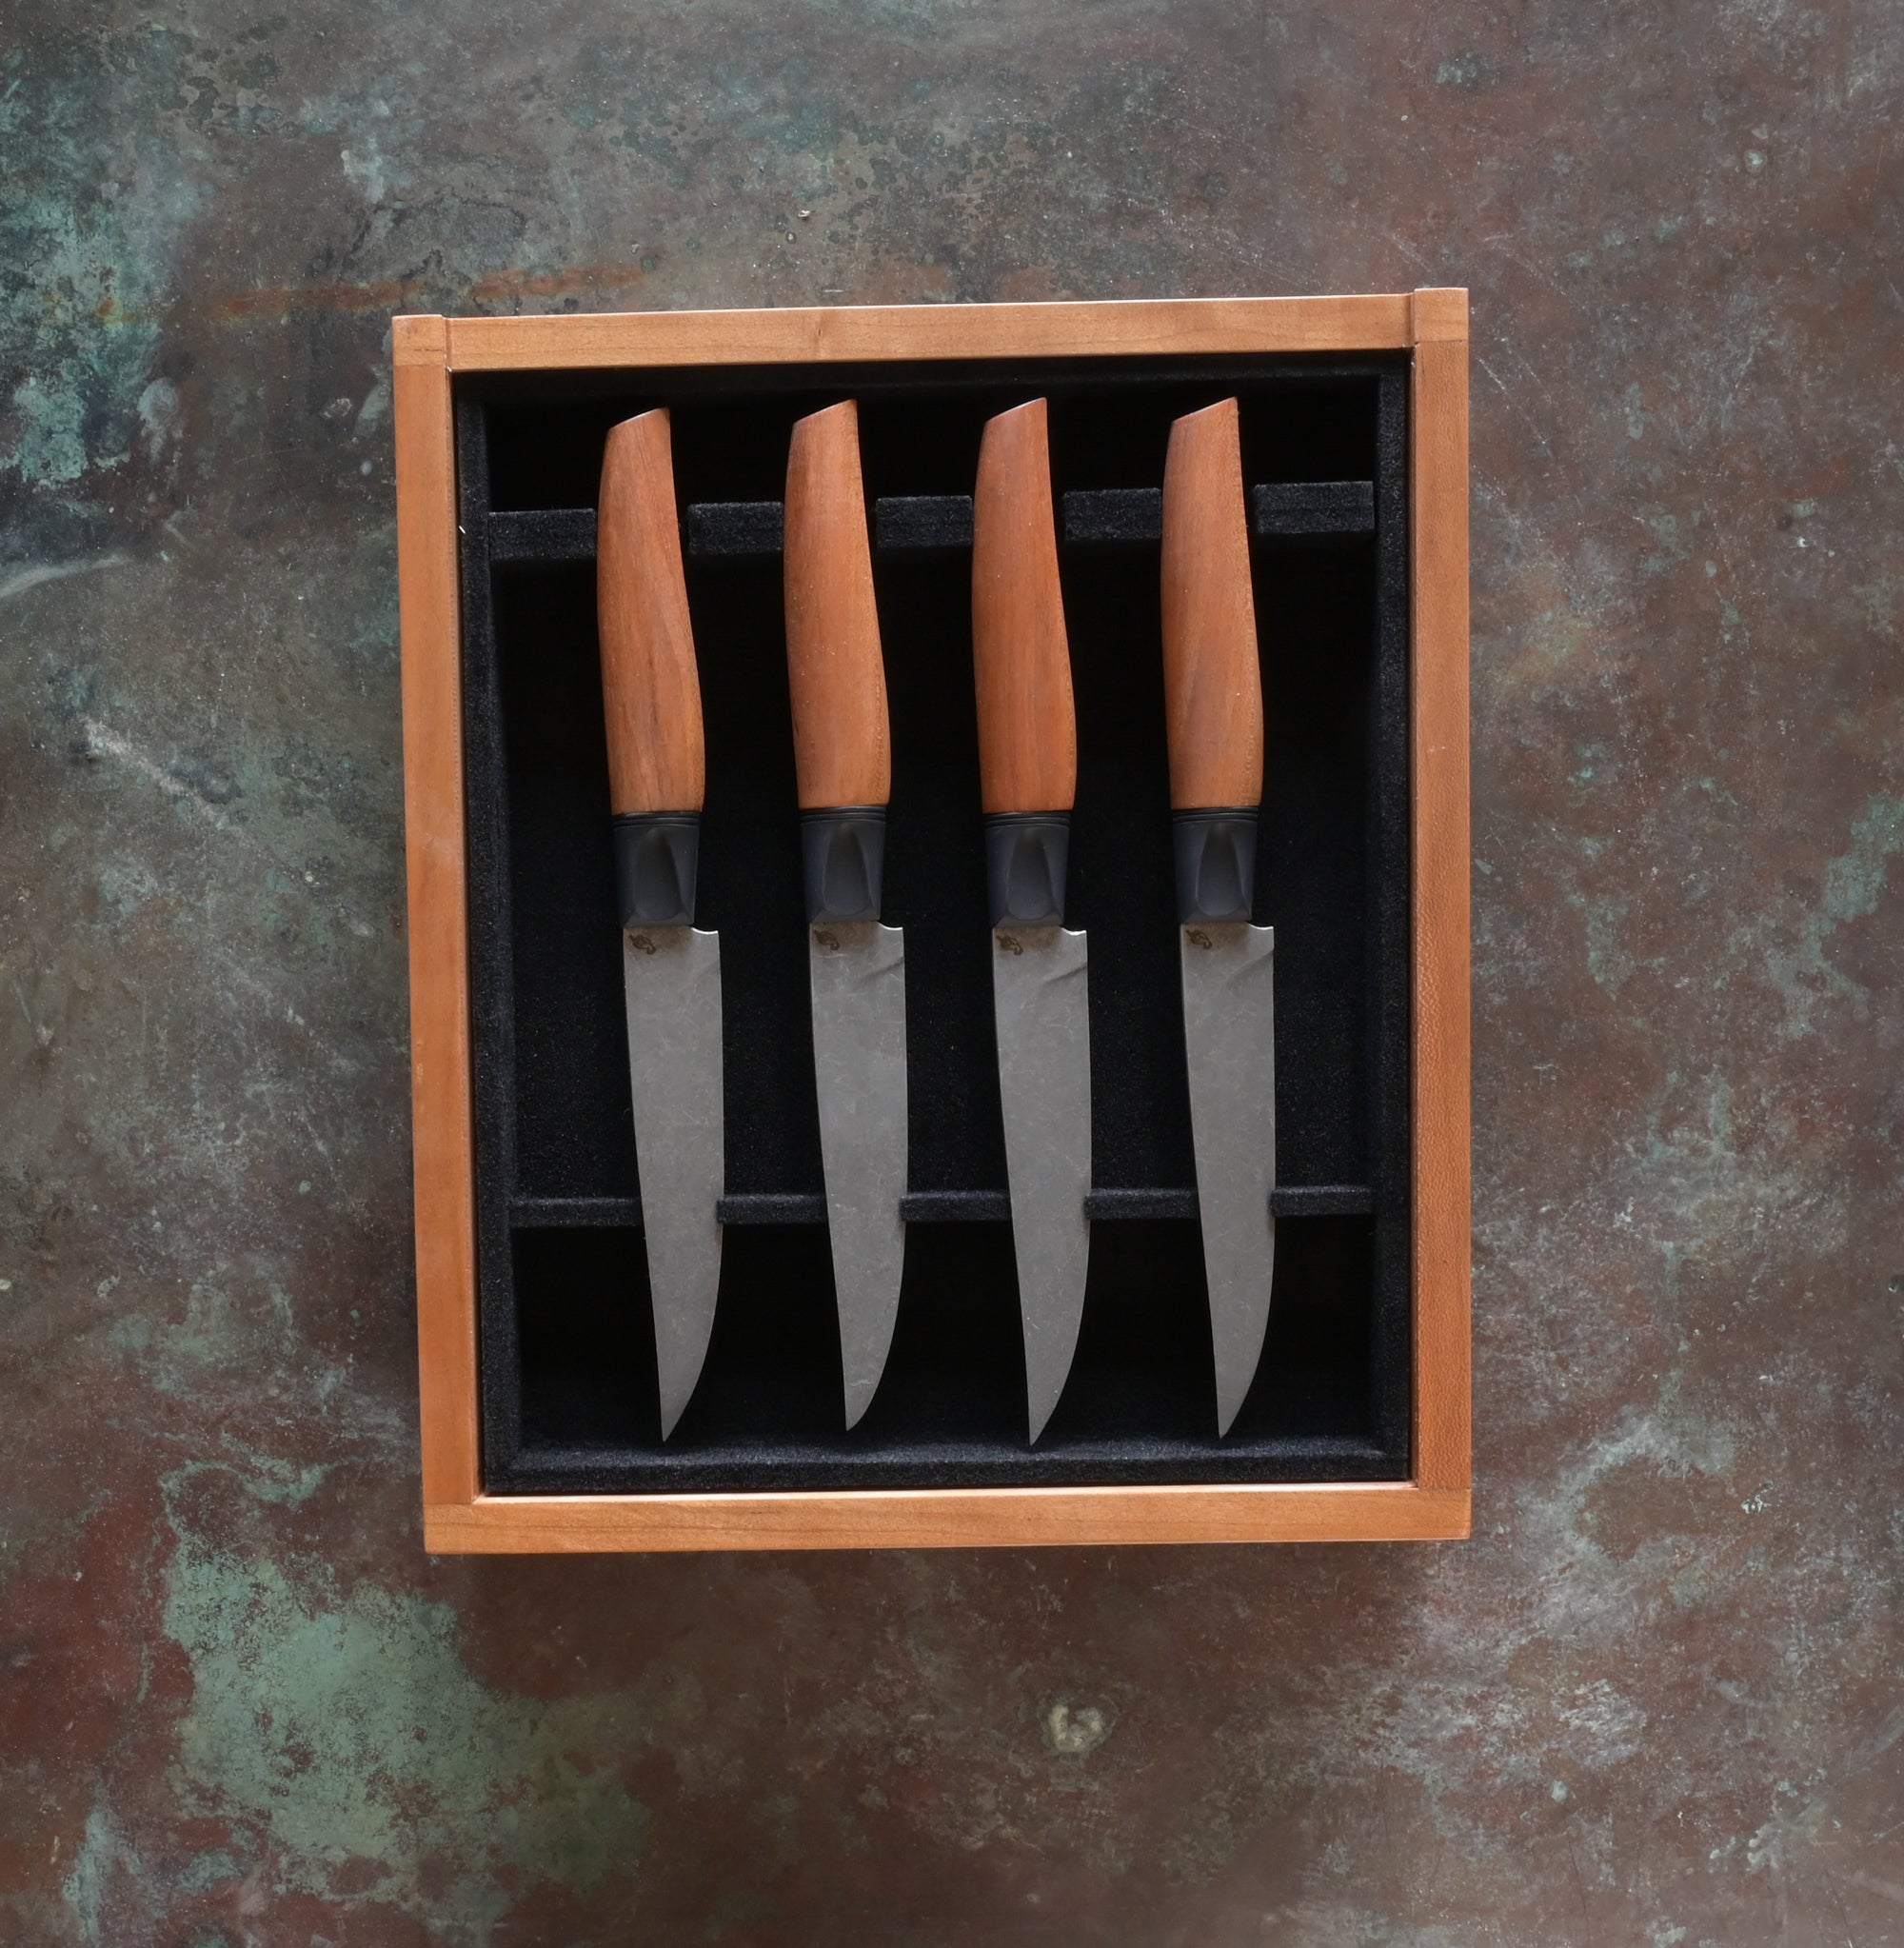 Limited Run of Steak Knife Pre-Order Ends Tonight at 11:59pm!